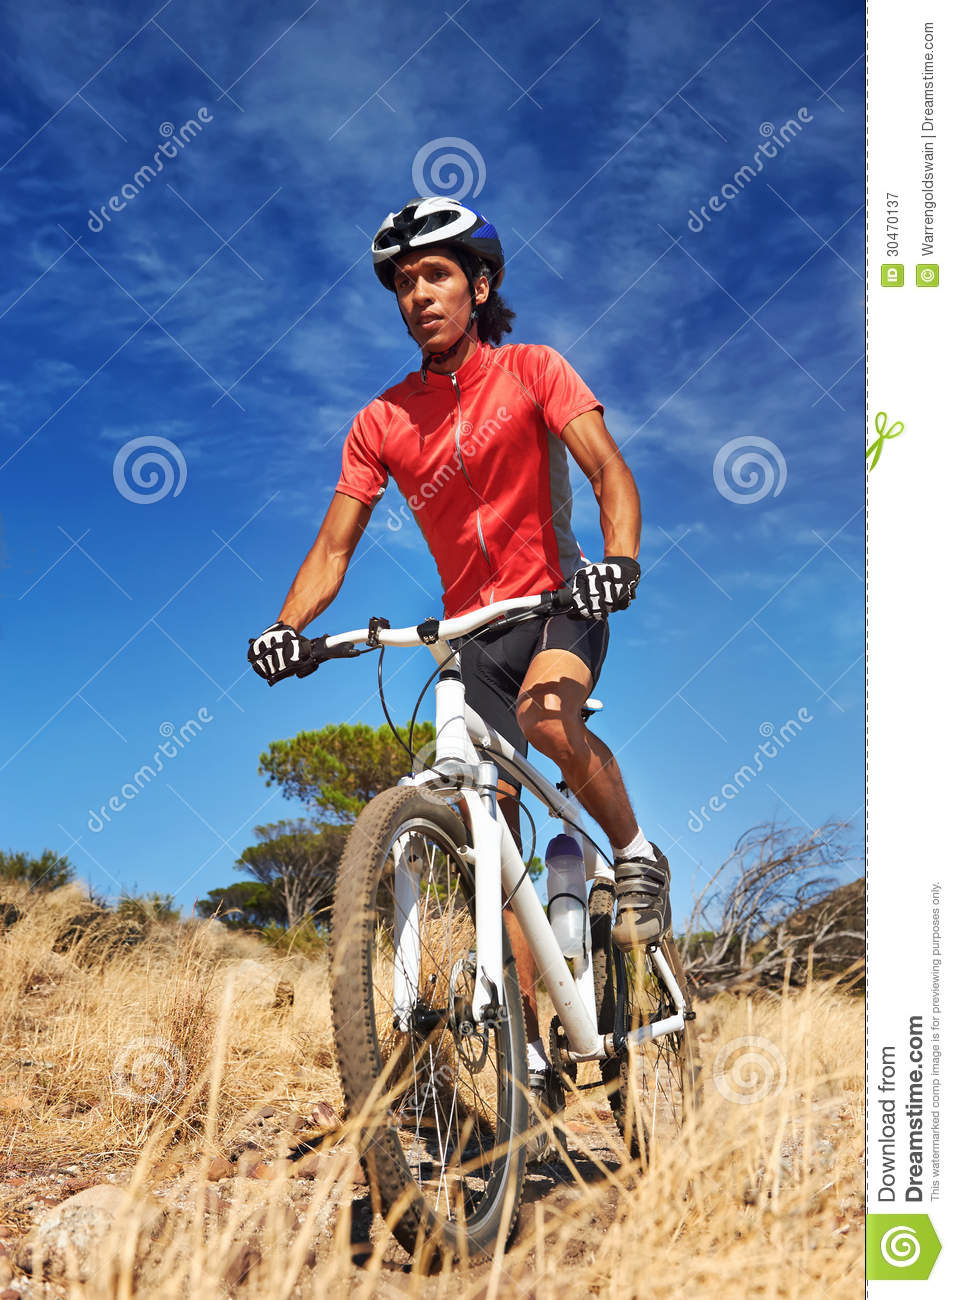 Trail Bike Riding Royalty Free Stock Photography   Image  30470137